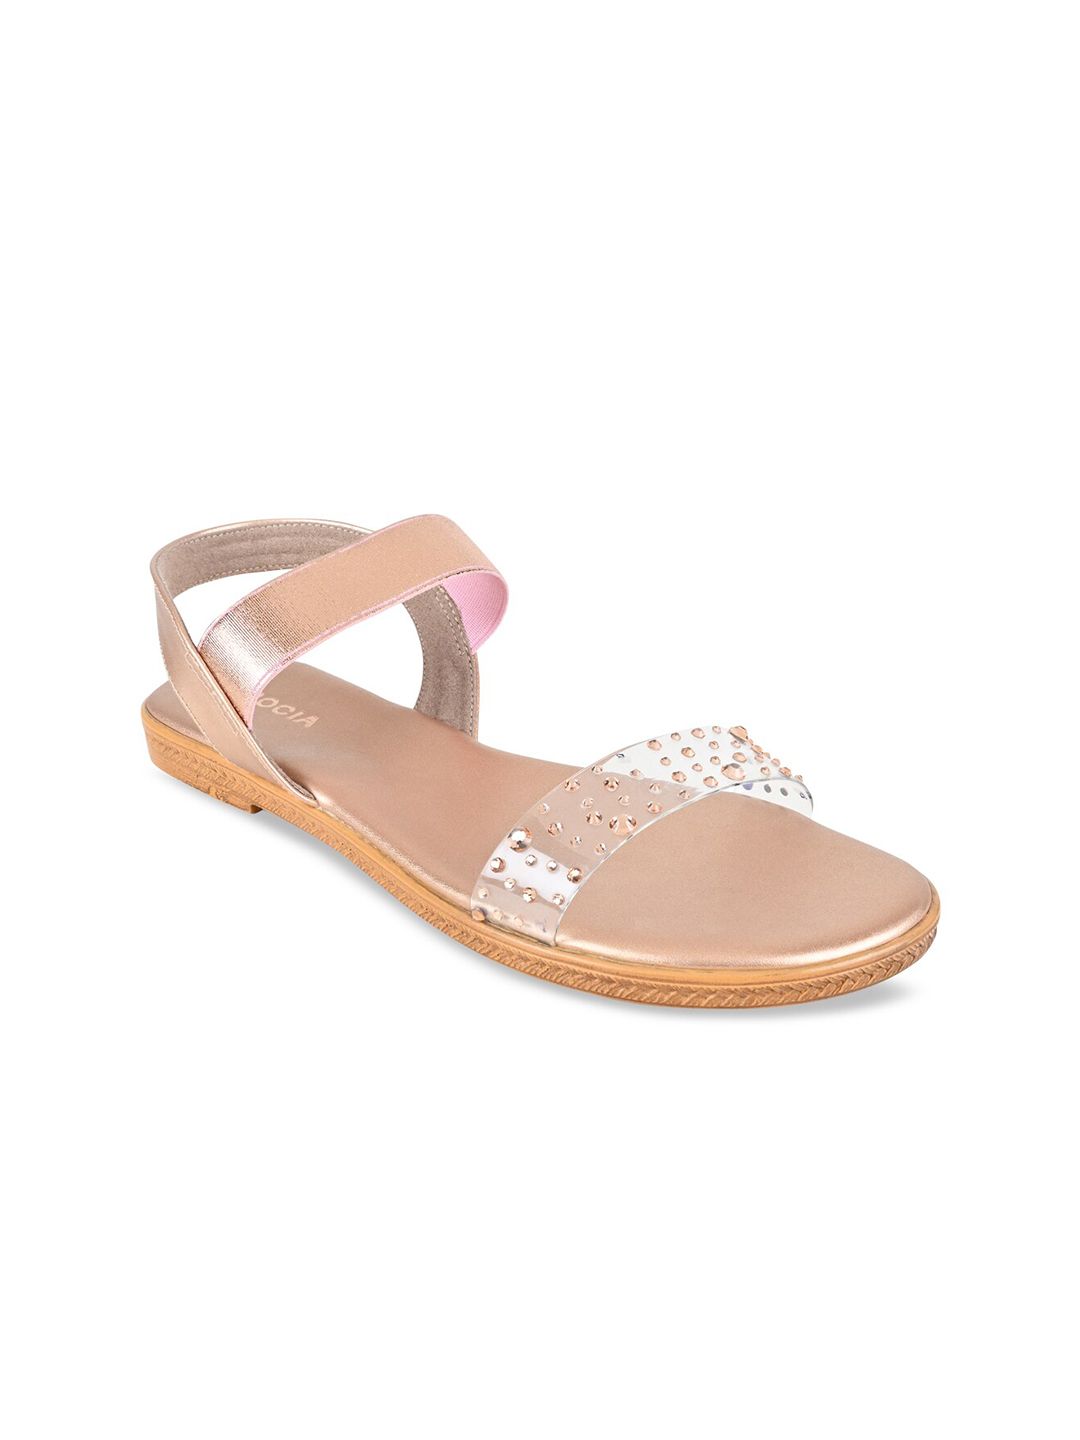 Rocia Women Embellished Open Toe Flats Price in India